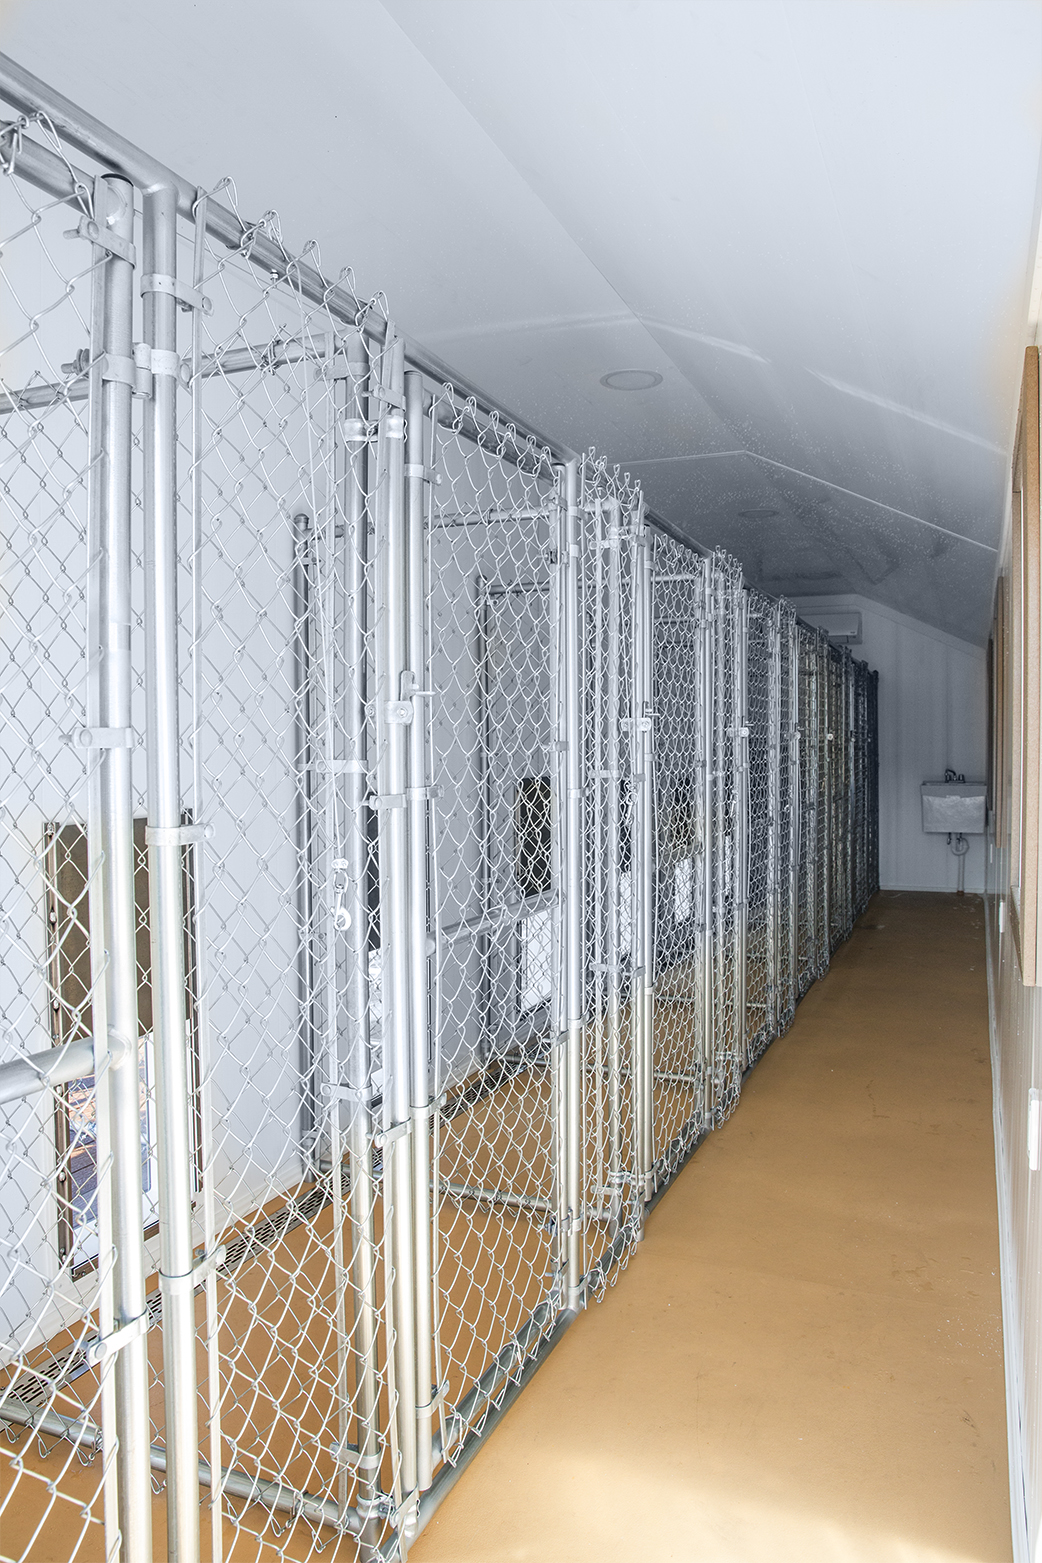 Interior of a 12x32 kennel with 8 boxes